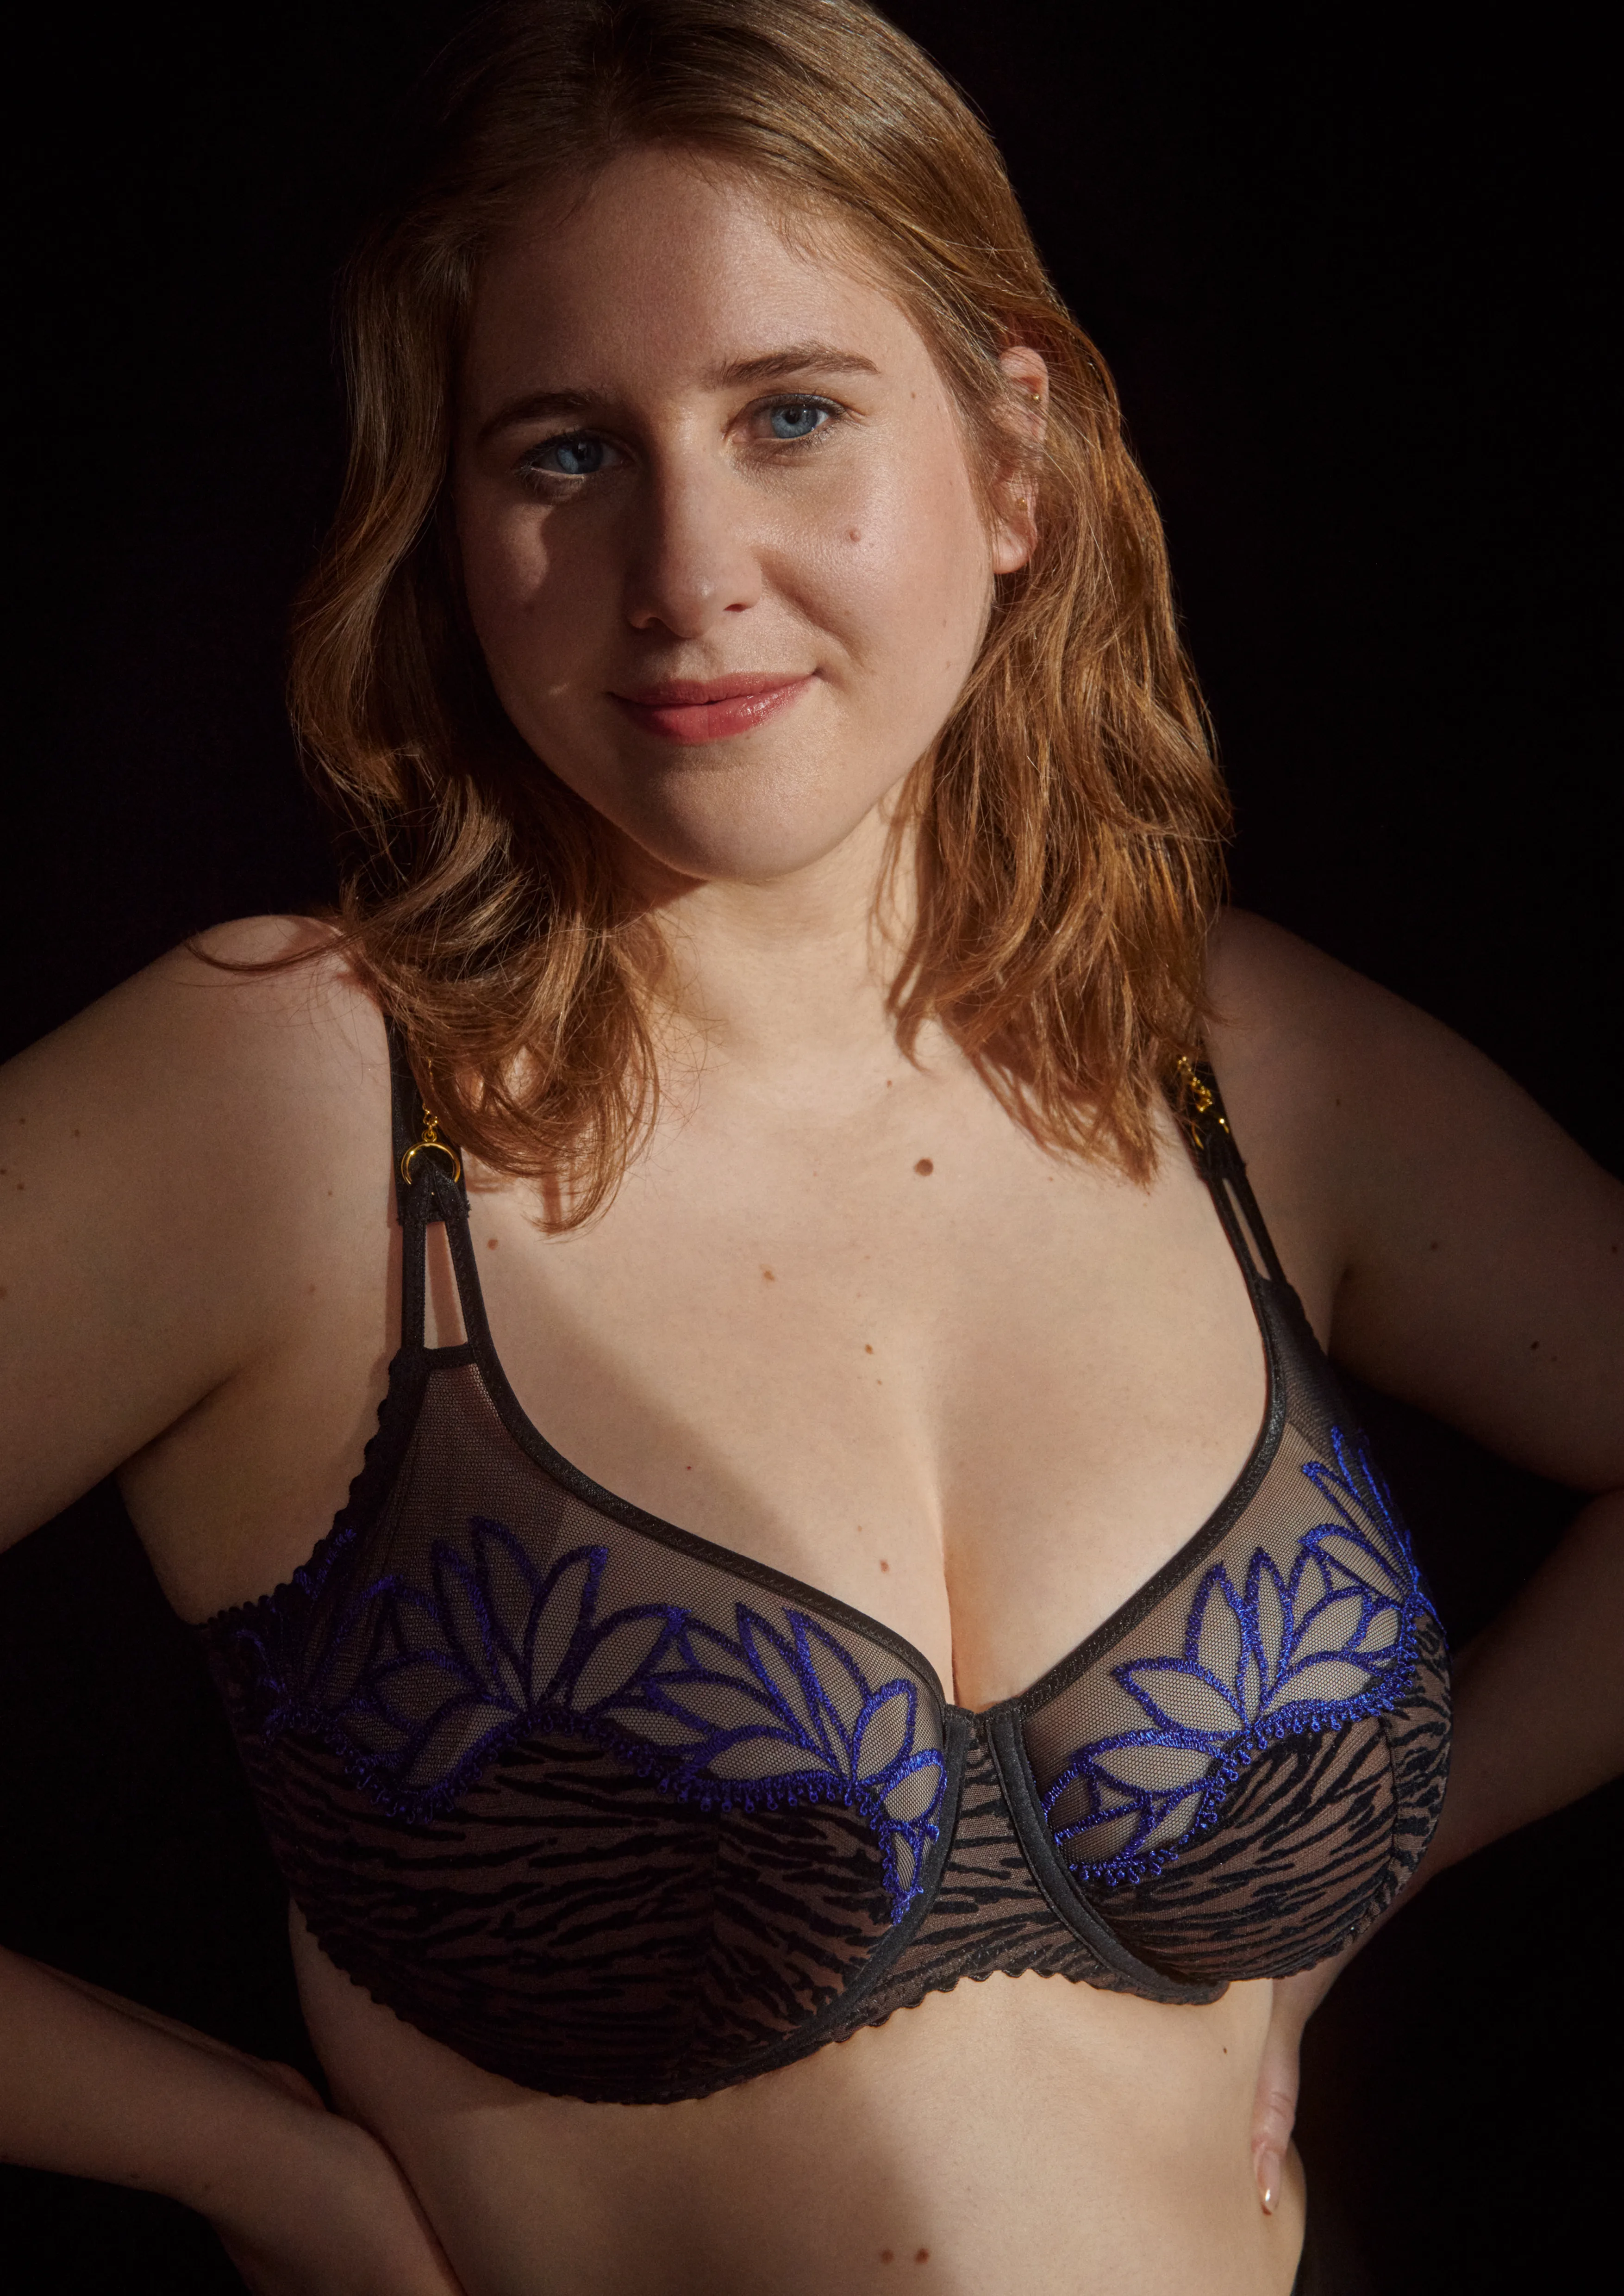 The confidence to shine in PrimaDonna lingerie: No modeling